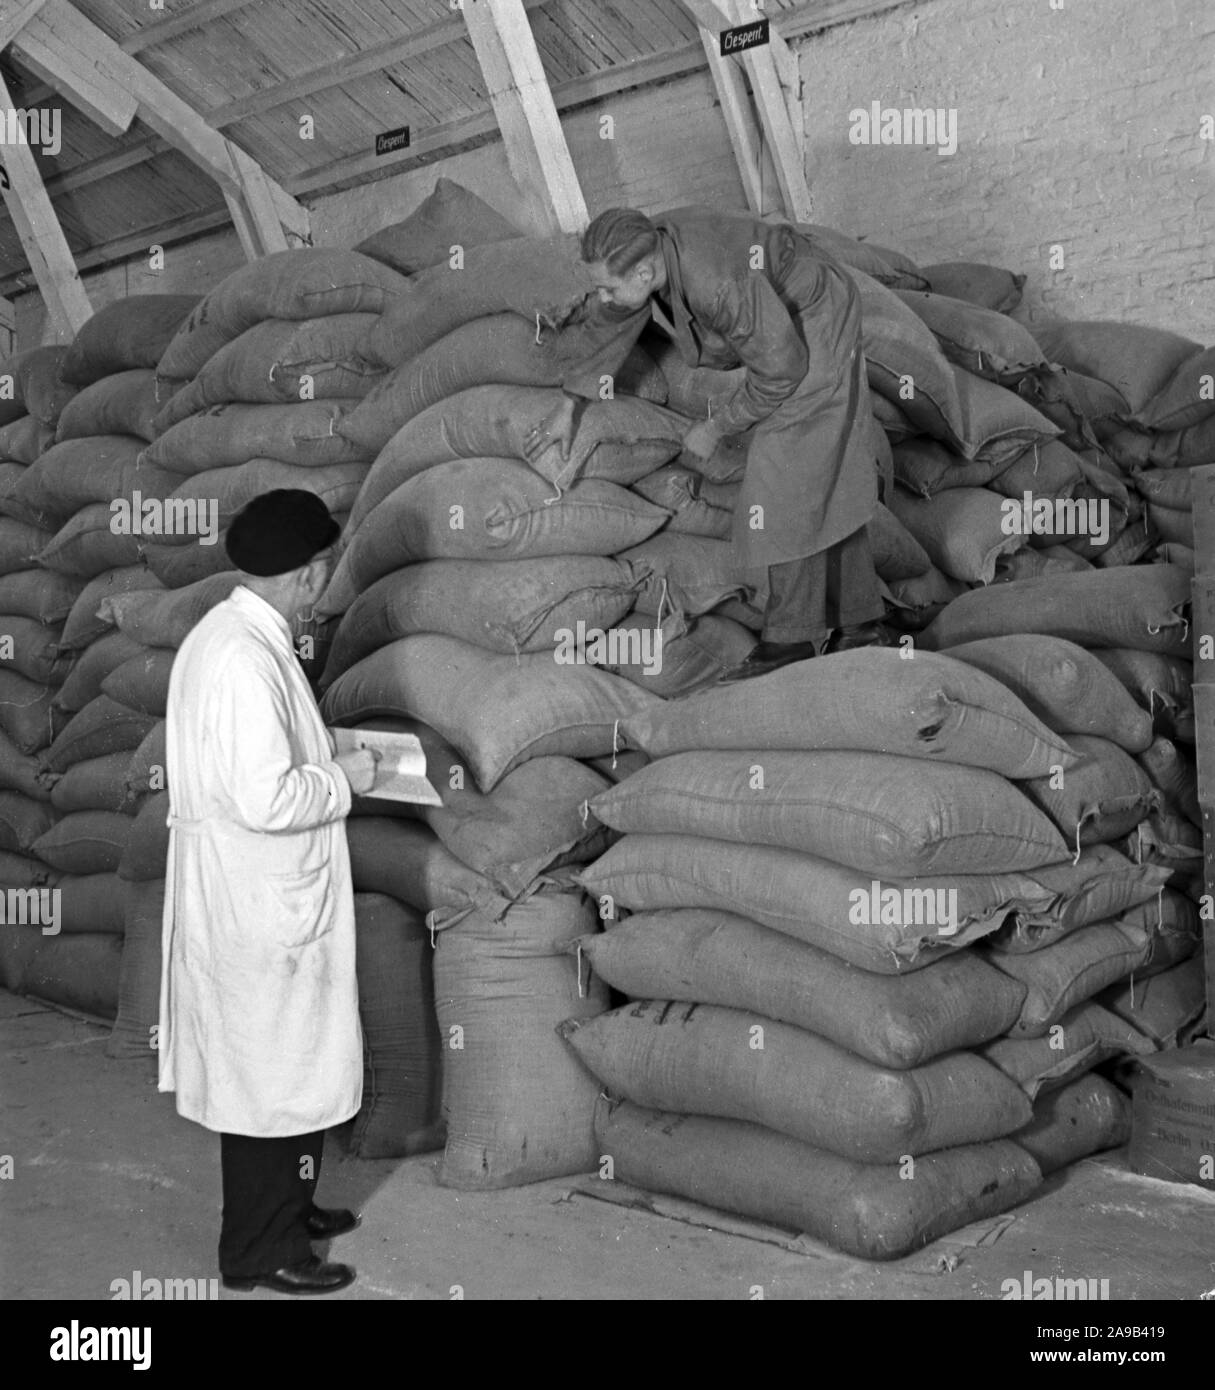 Apprentice and instructor packing and counting sacks at the warehouse, Germany 1940s. Stock Photo